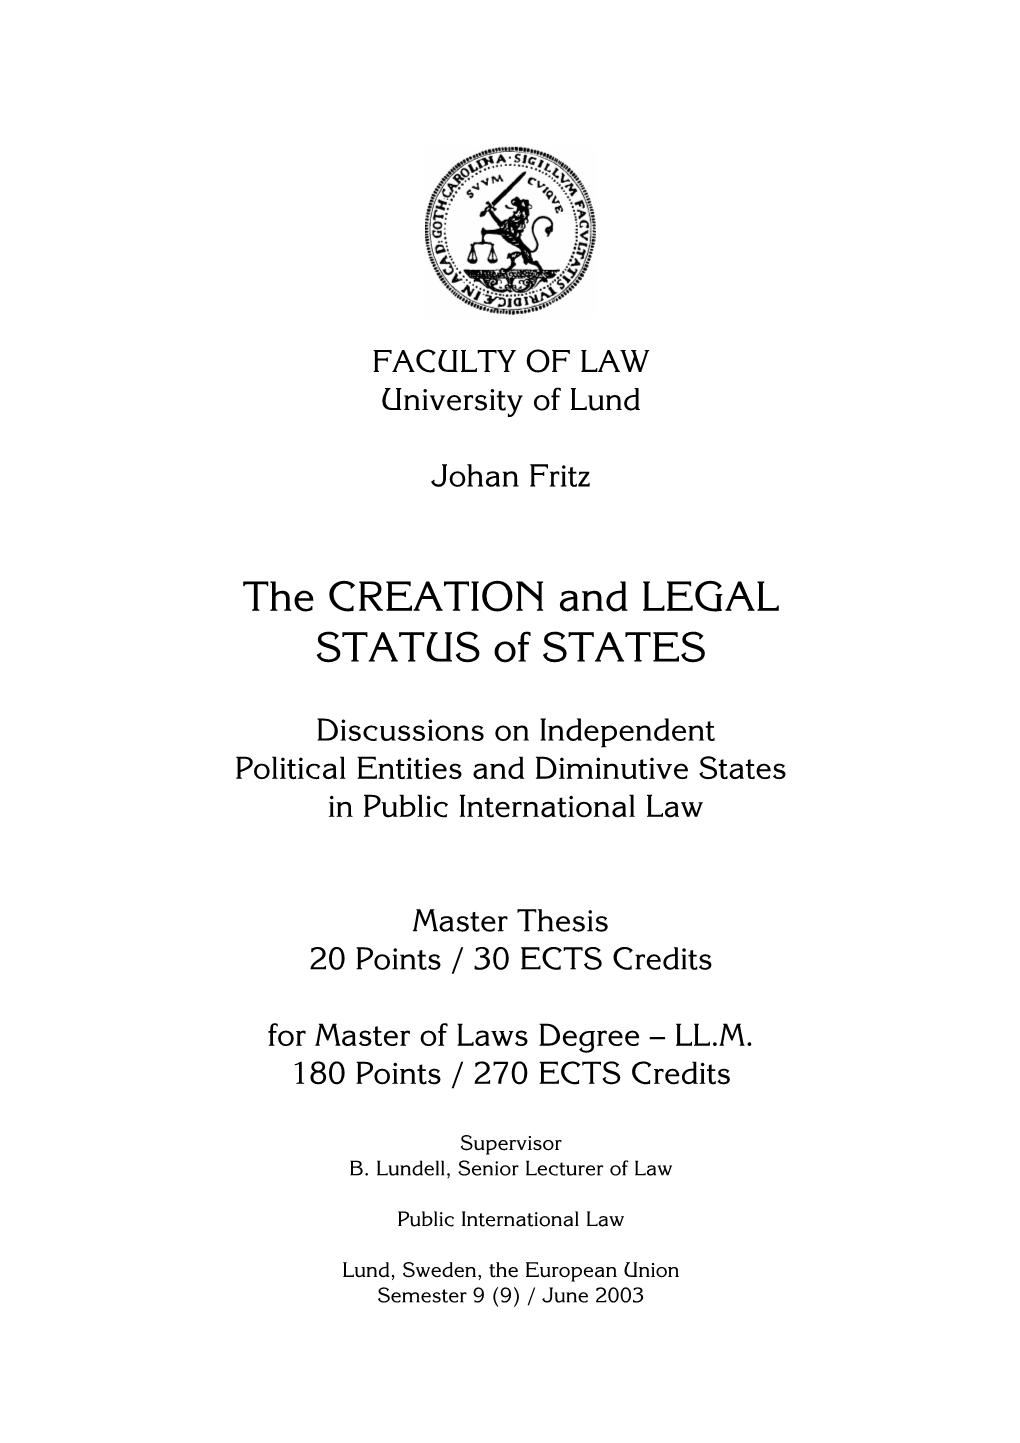 The CREATION and LEGAL STATUS of STATES